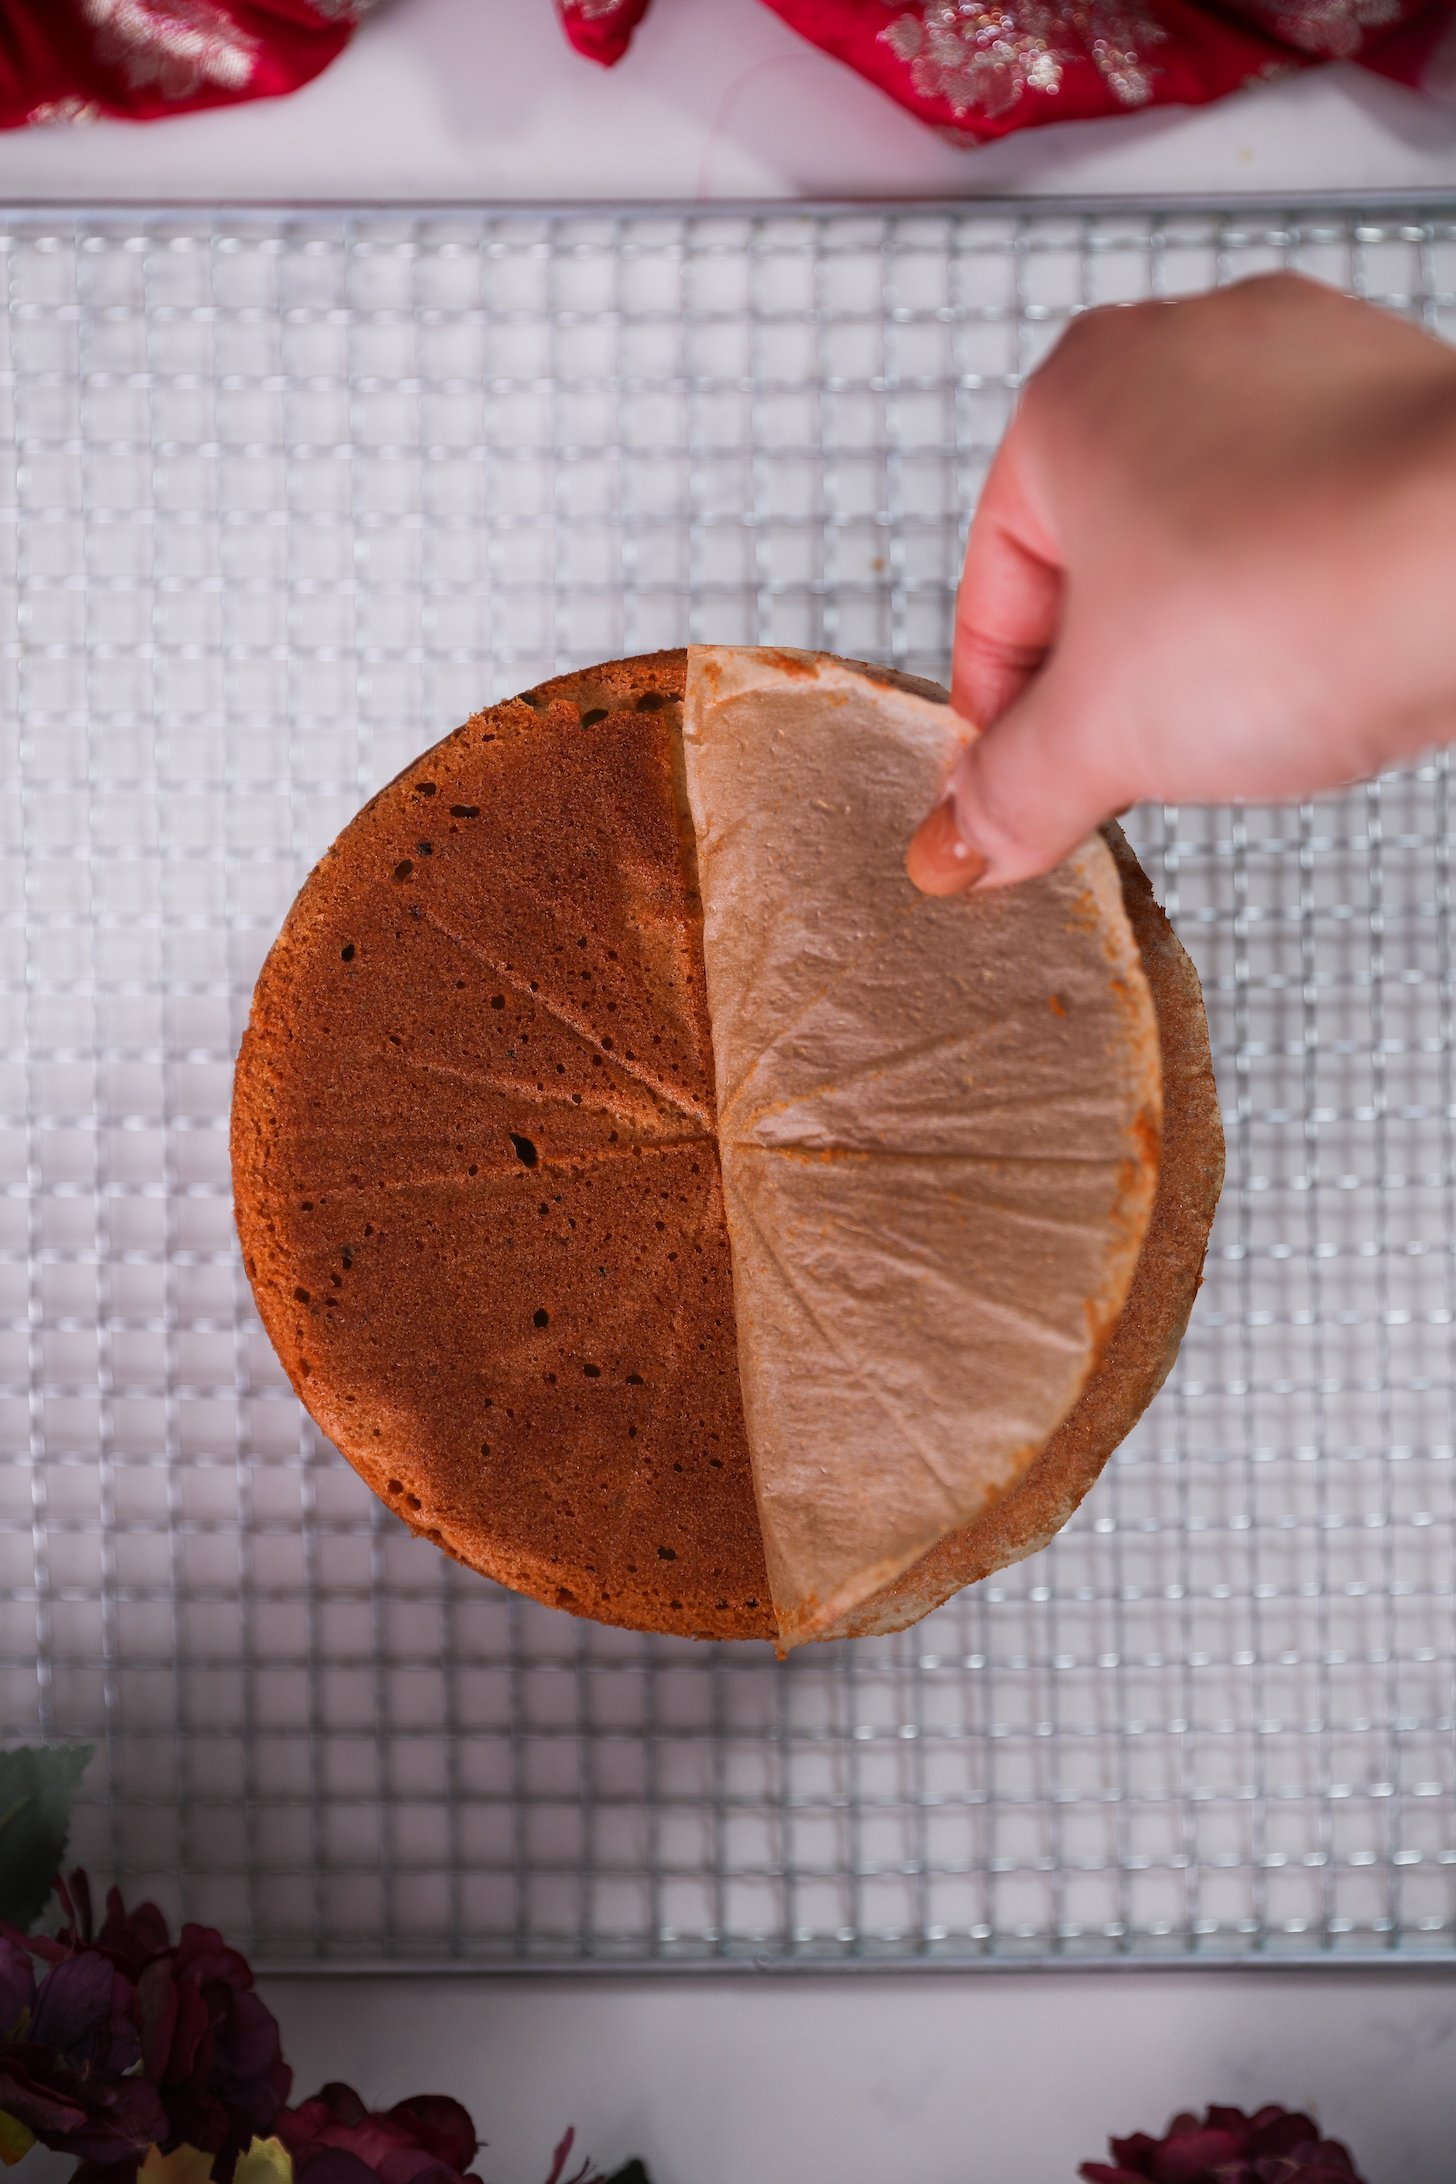 A hand peels parchment paper from a round cake positioned on a wire rack.